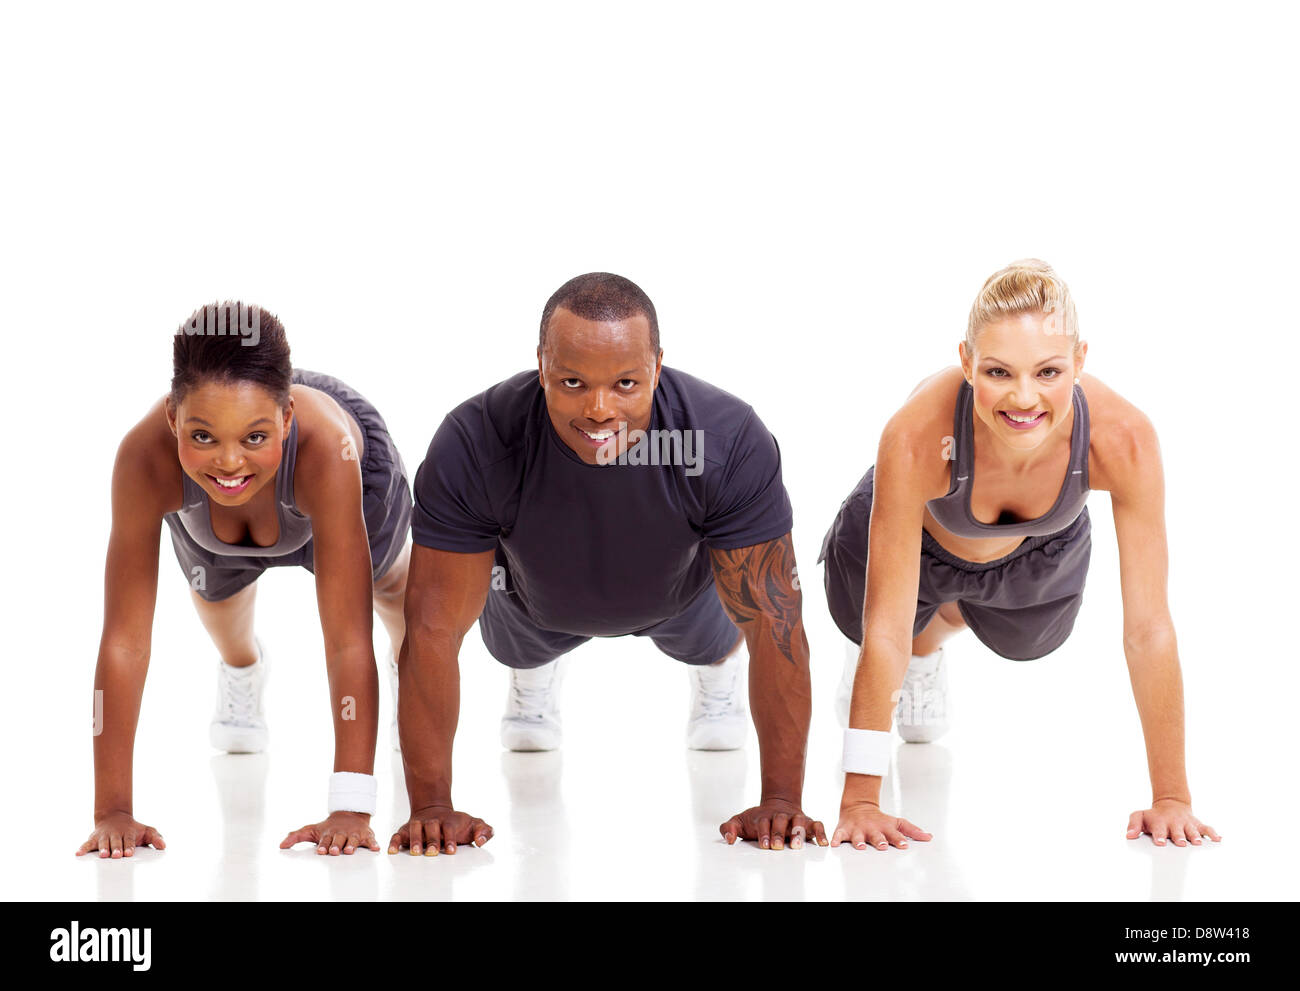 group of fit people doing pushups on white background Stock Photo